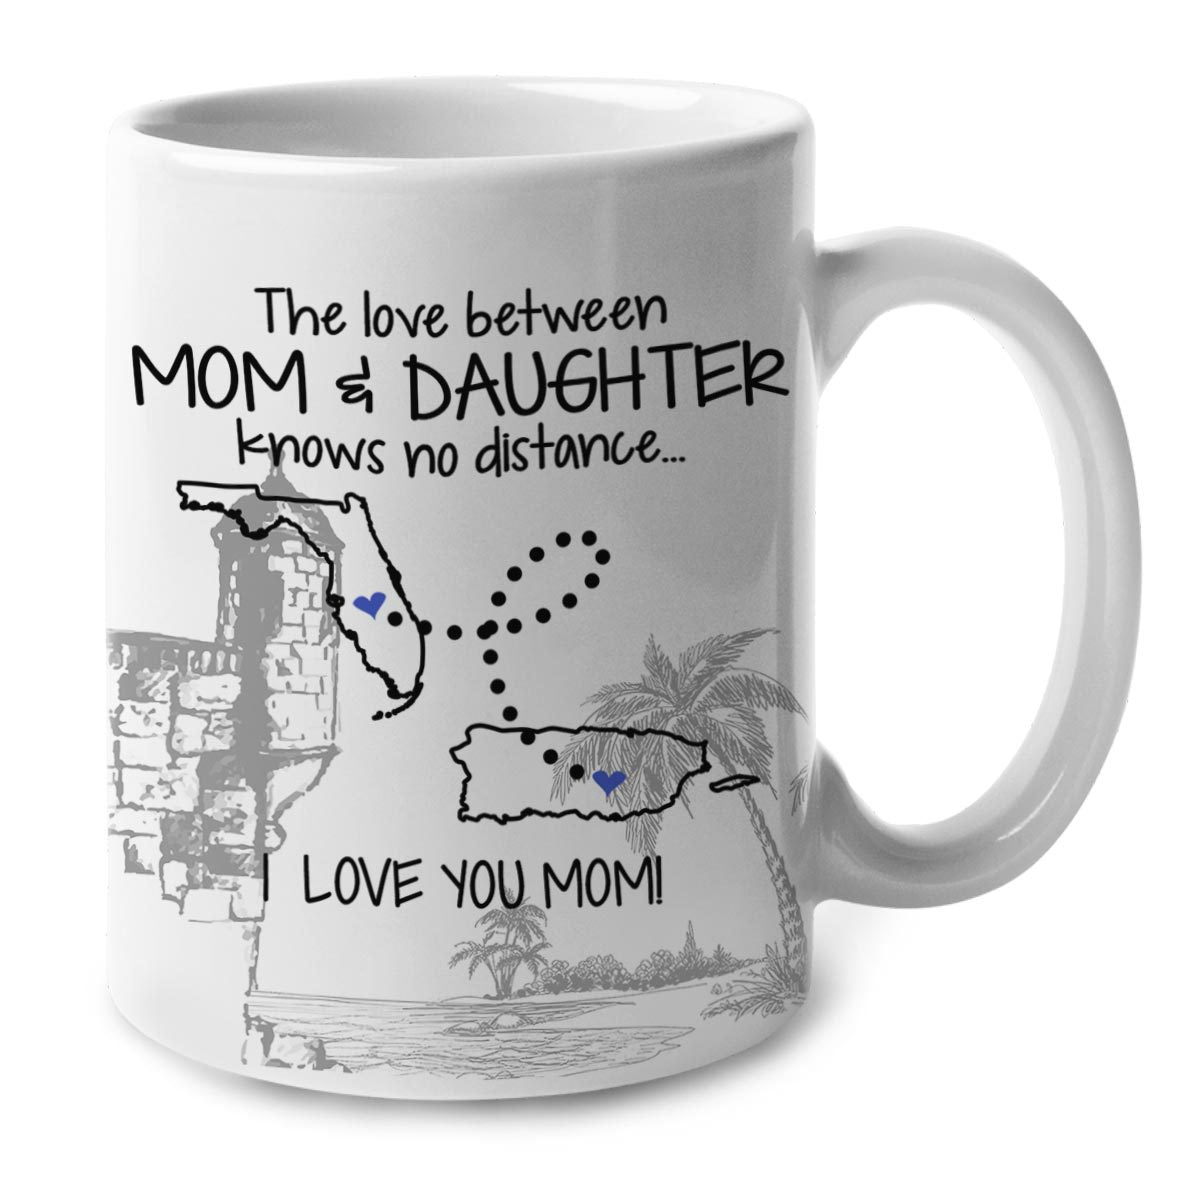 Personalized Mom Coffee Mugs - Love Knows No Distance